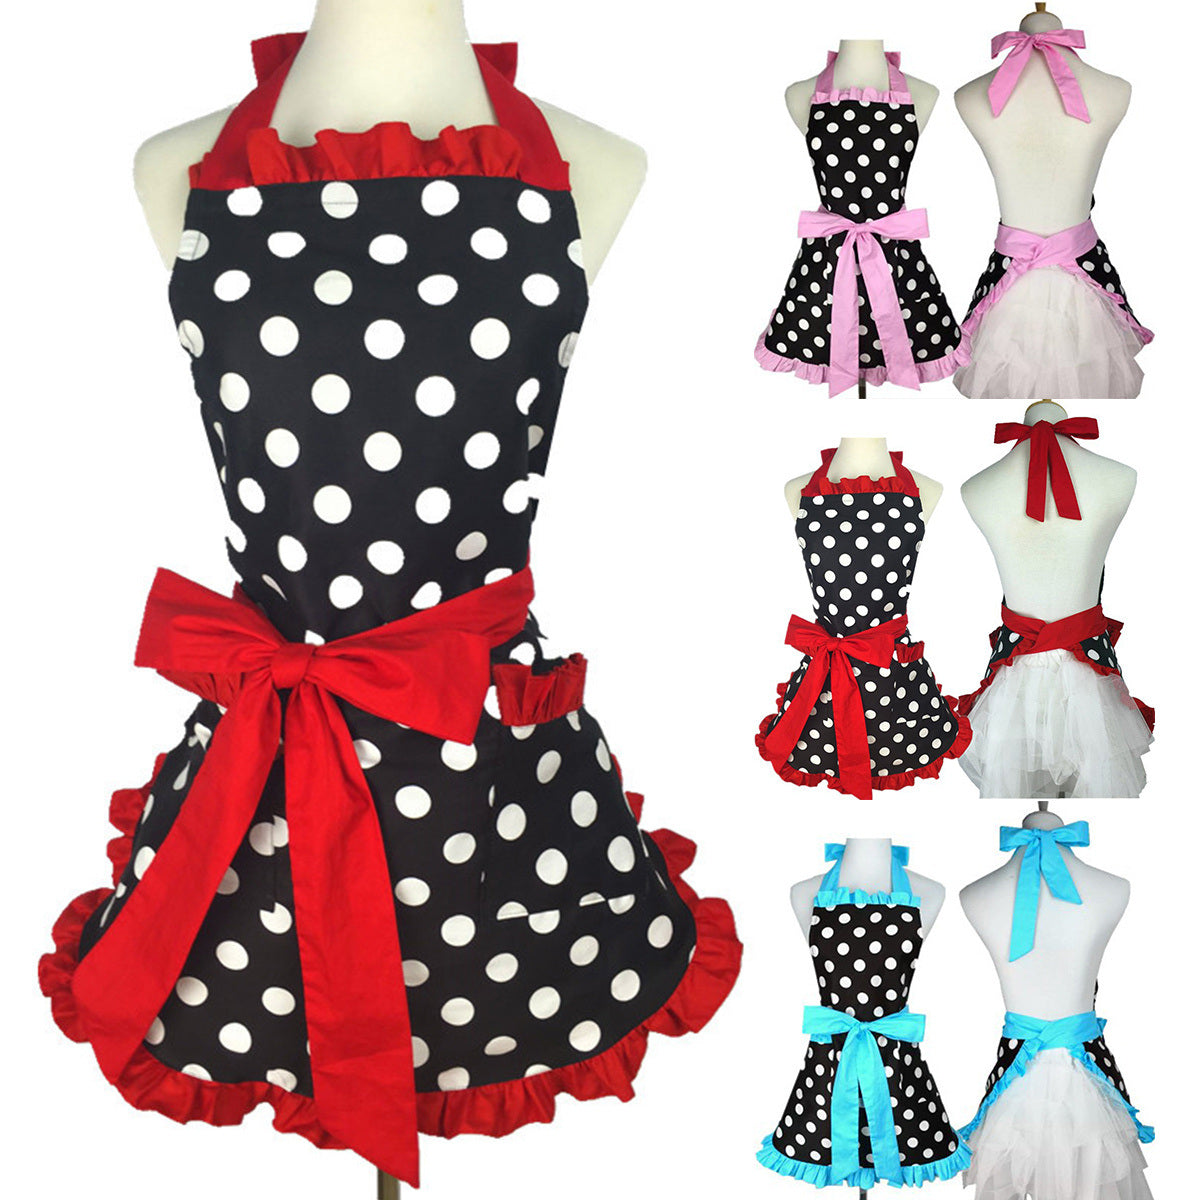 1pc Cute Apron, Retro Polka Dot Aprons, Ruffle Side Vintage Cooking Aprons With Pockets, Adjustable Kitchen Aprons For Women Girls, Waitress Chef, For Girls, Polyester Cotton Aprons